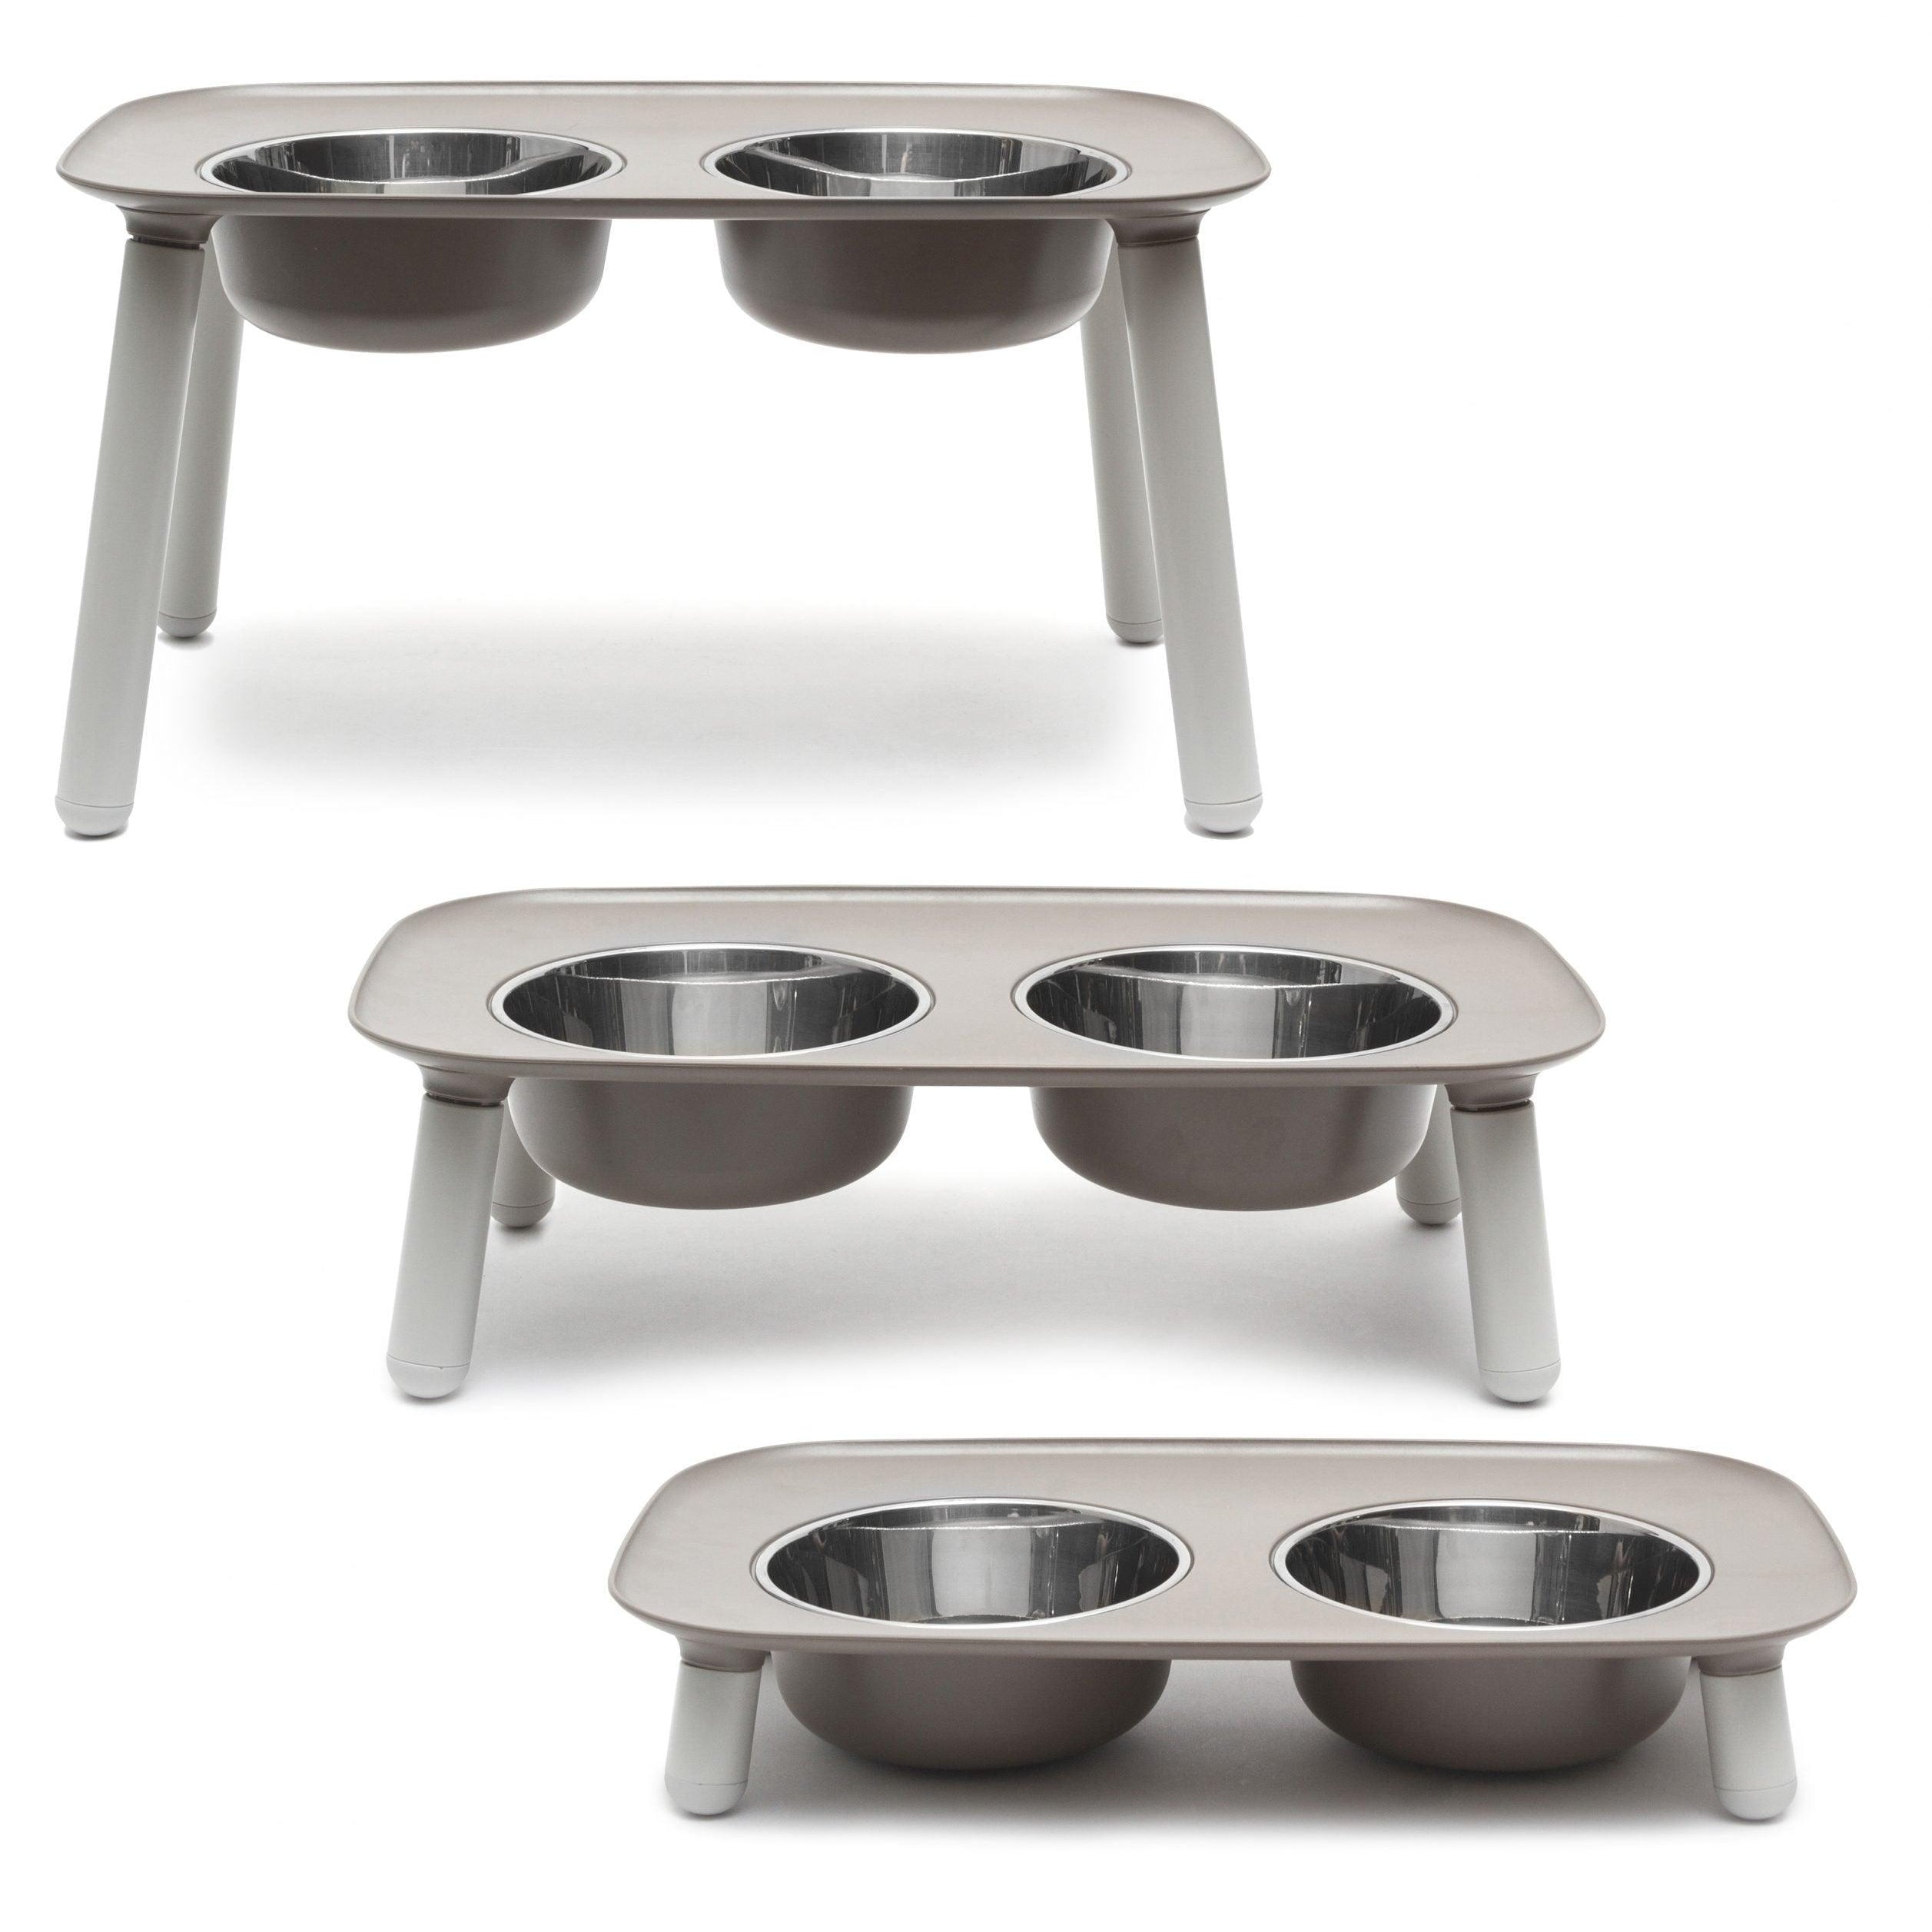 Adjustable Elevated Double Feeder with Faux Wood Legs and Stainless Steel Bowls - Rocky & Maggie's Pet Boutique and Salon